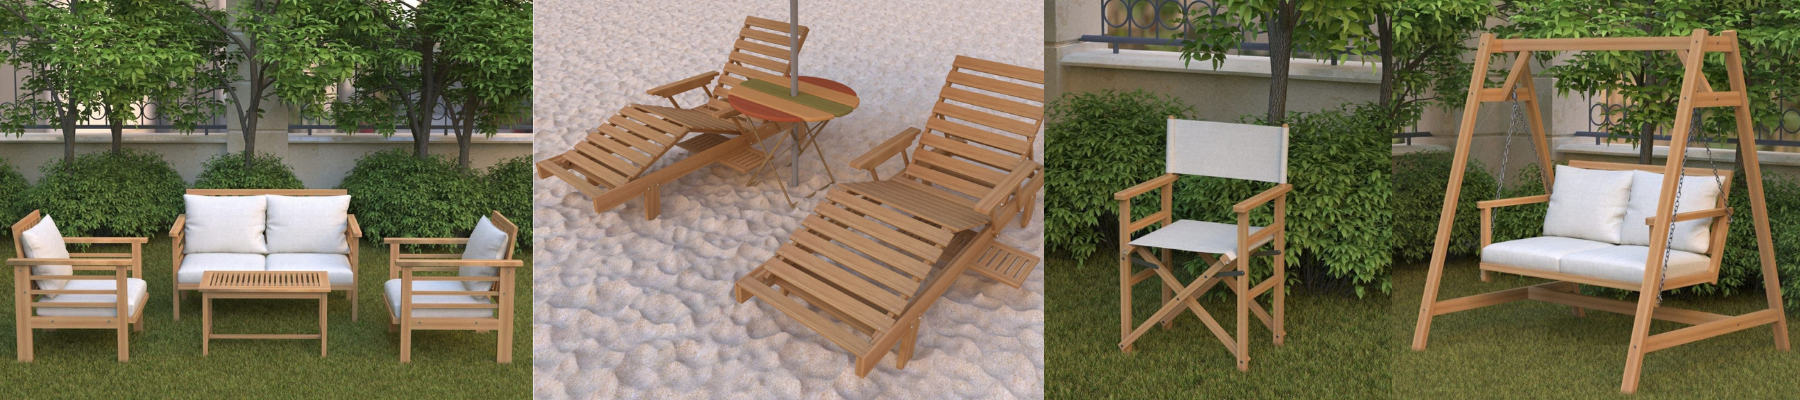 Wooden Outdoor furniture furniture ideal - Wood Outdoor Furniture